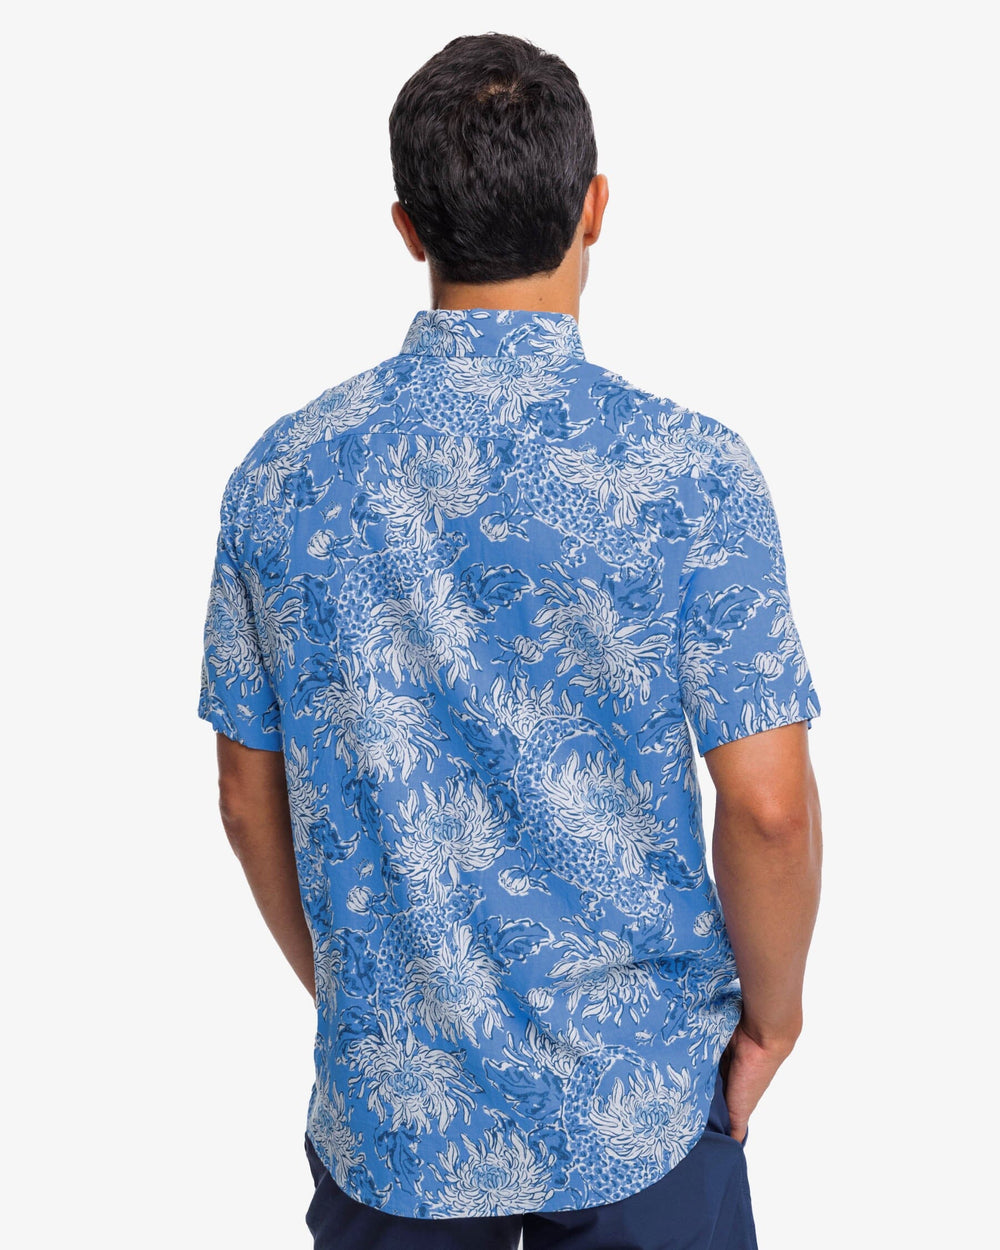 The back view of the Croc and Lock It Short Sleeve Sport Shirt by Southern Tide - Boca Blue